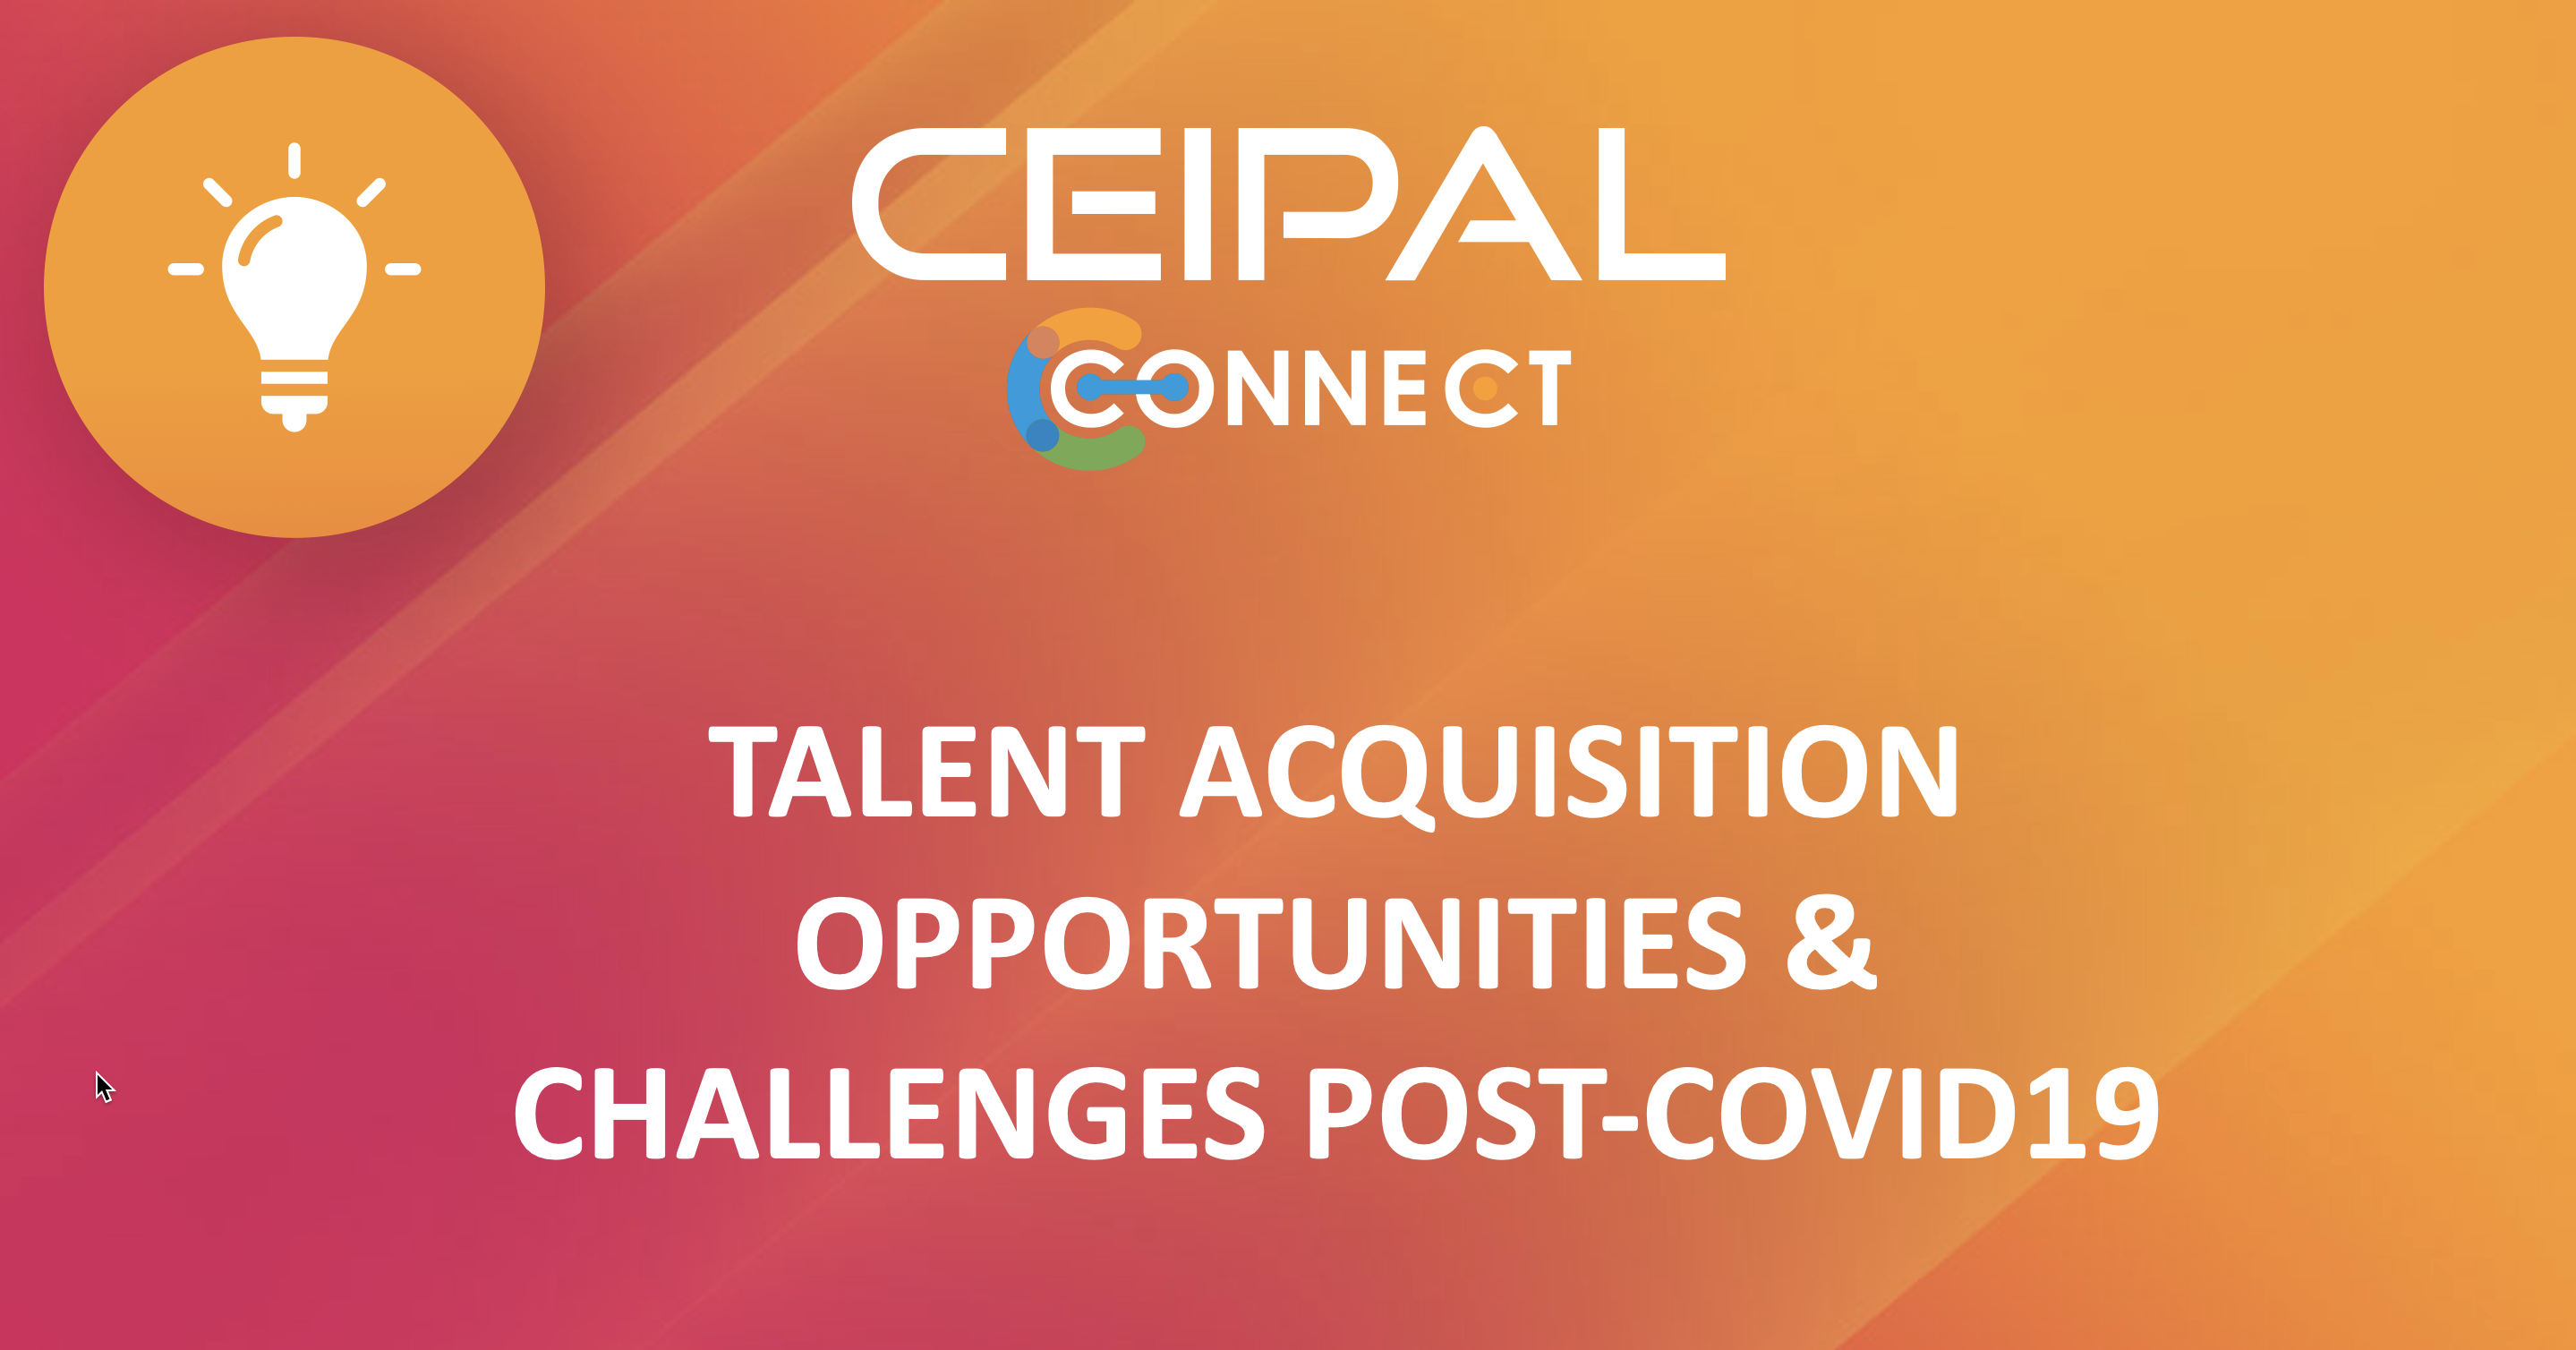 Talent Acquisition Opportunities & Challenges Post-COVID19